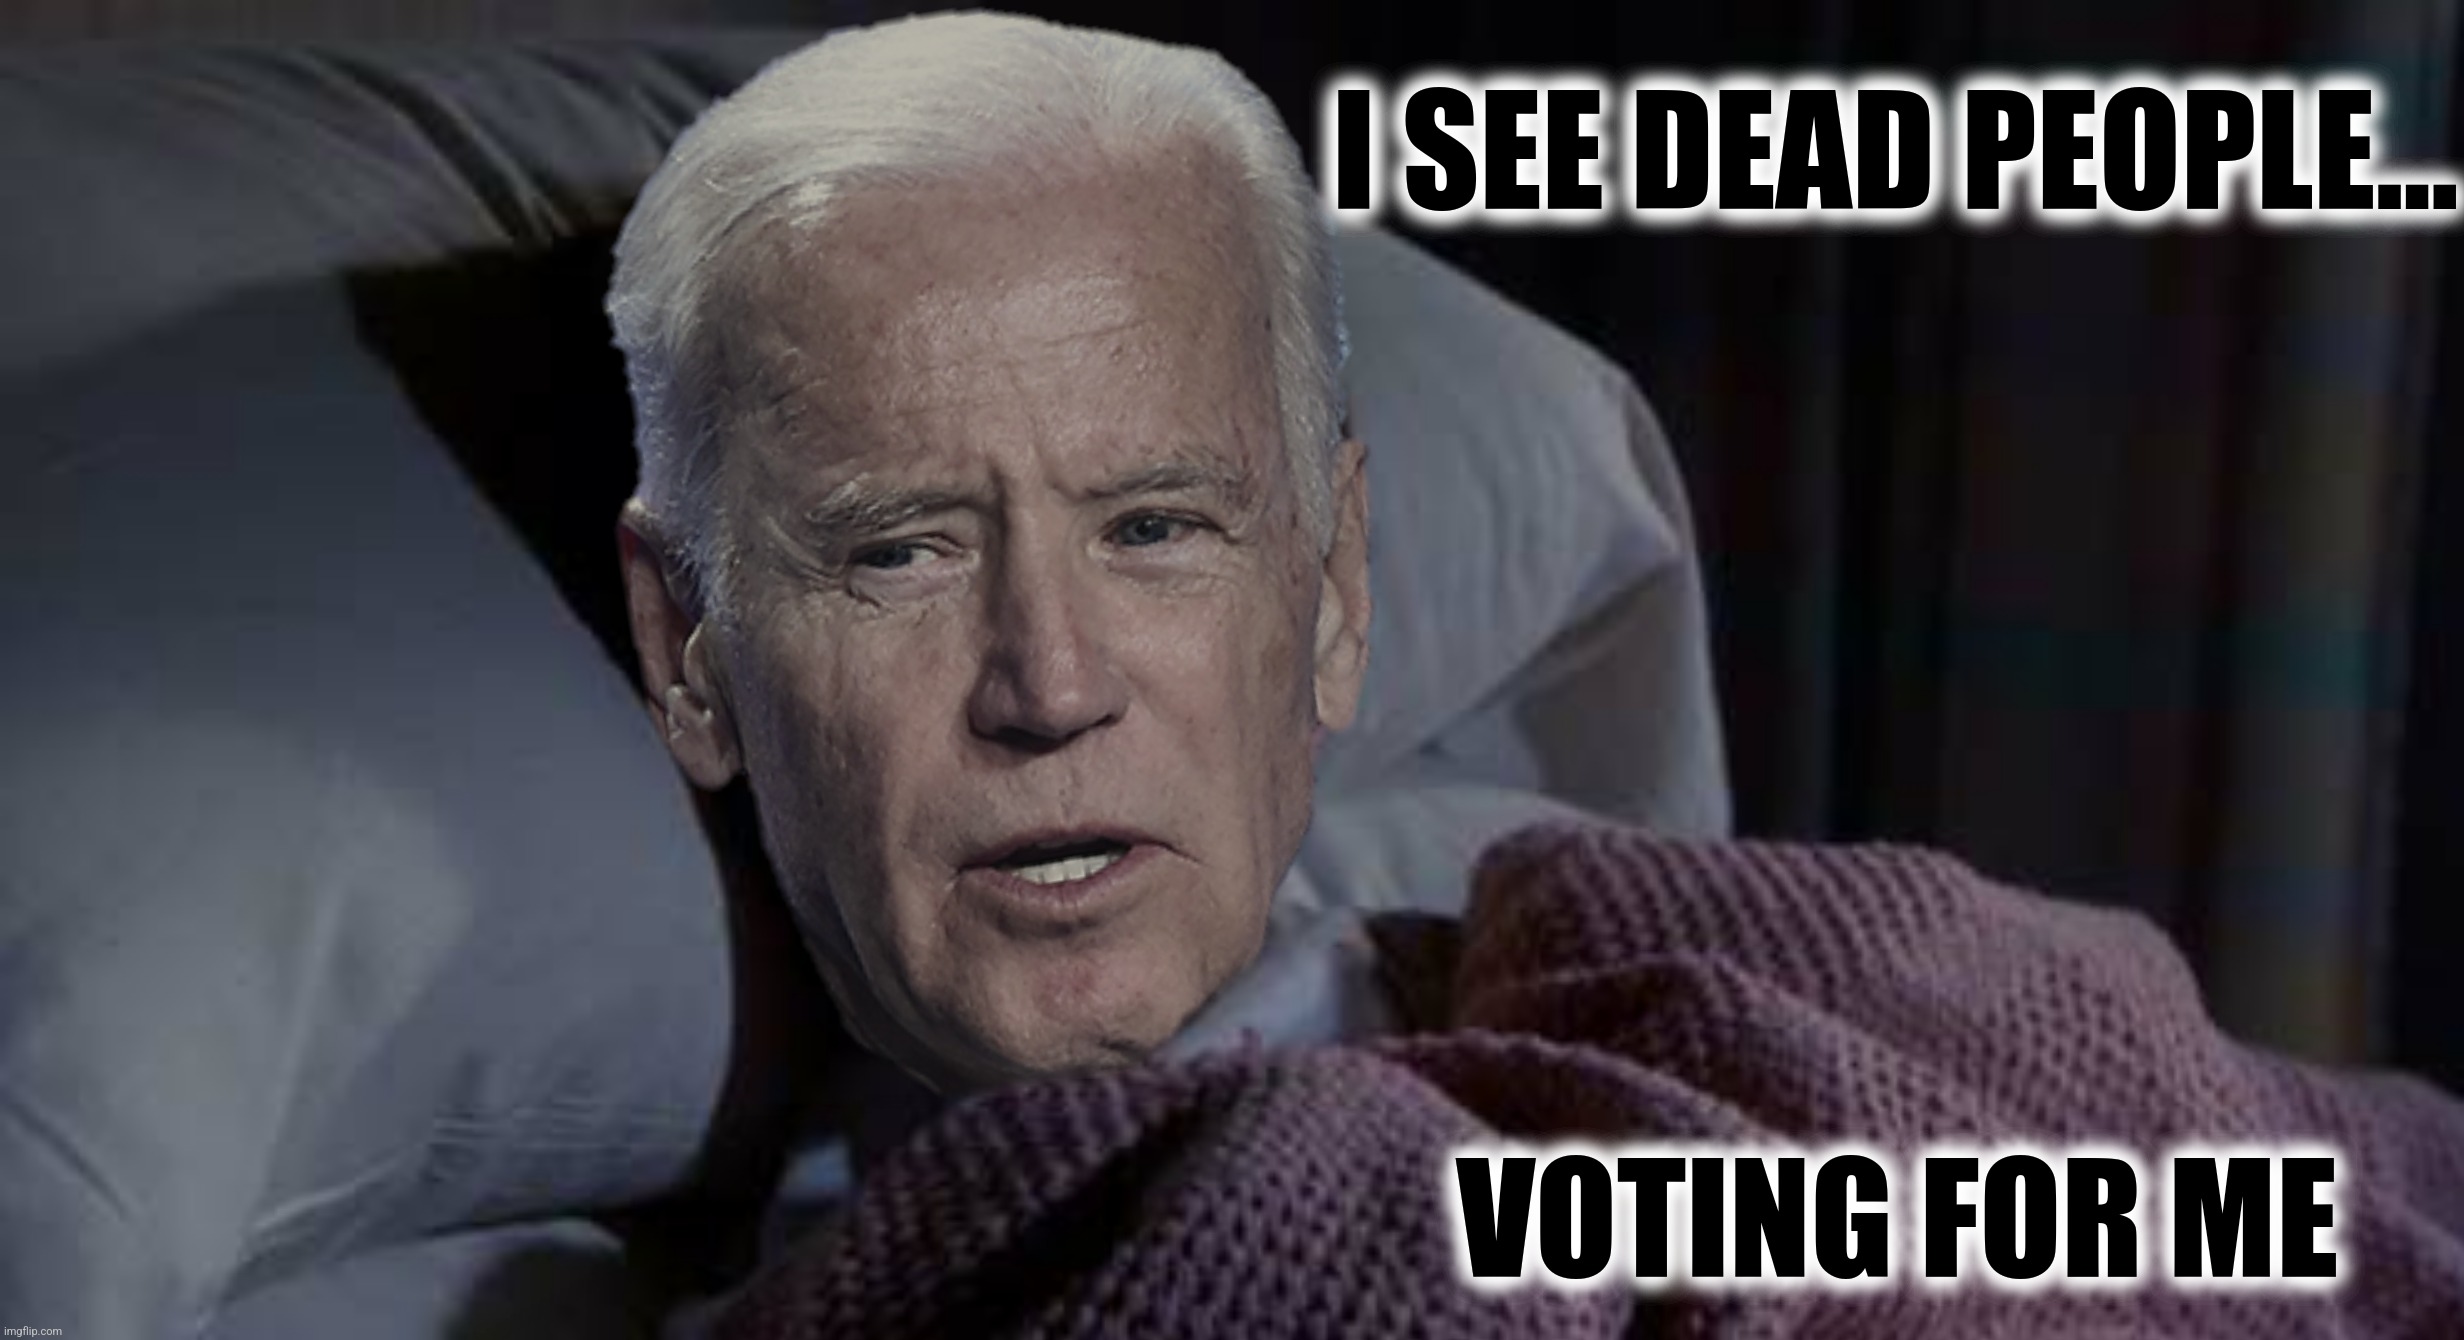 I SEE DEAD PEOPLE... VOTING FOR ME | made w/ Imgflip meme maker